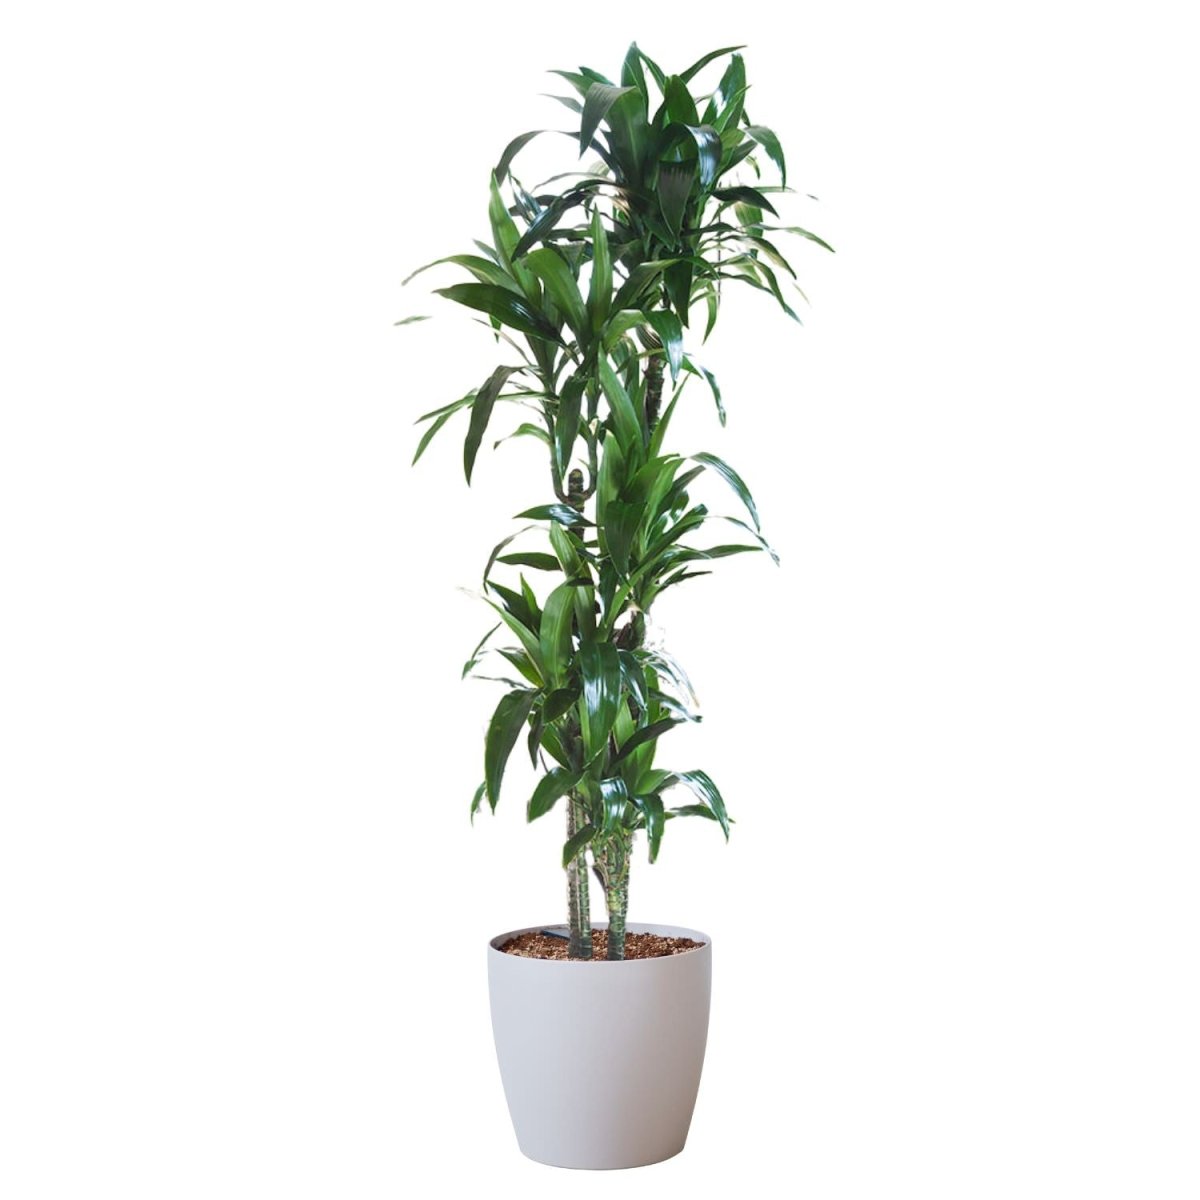 Dracaena Lisa Potted In Lechuza Classico Trend Planter - Sand Brown - My City Plants